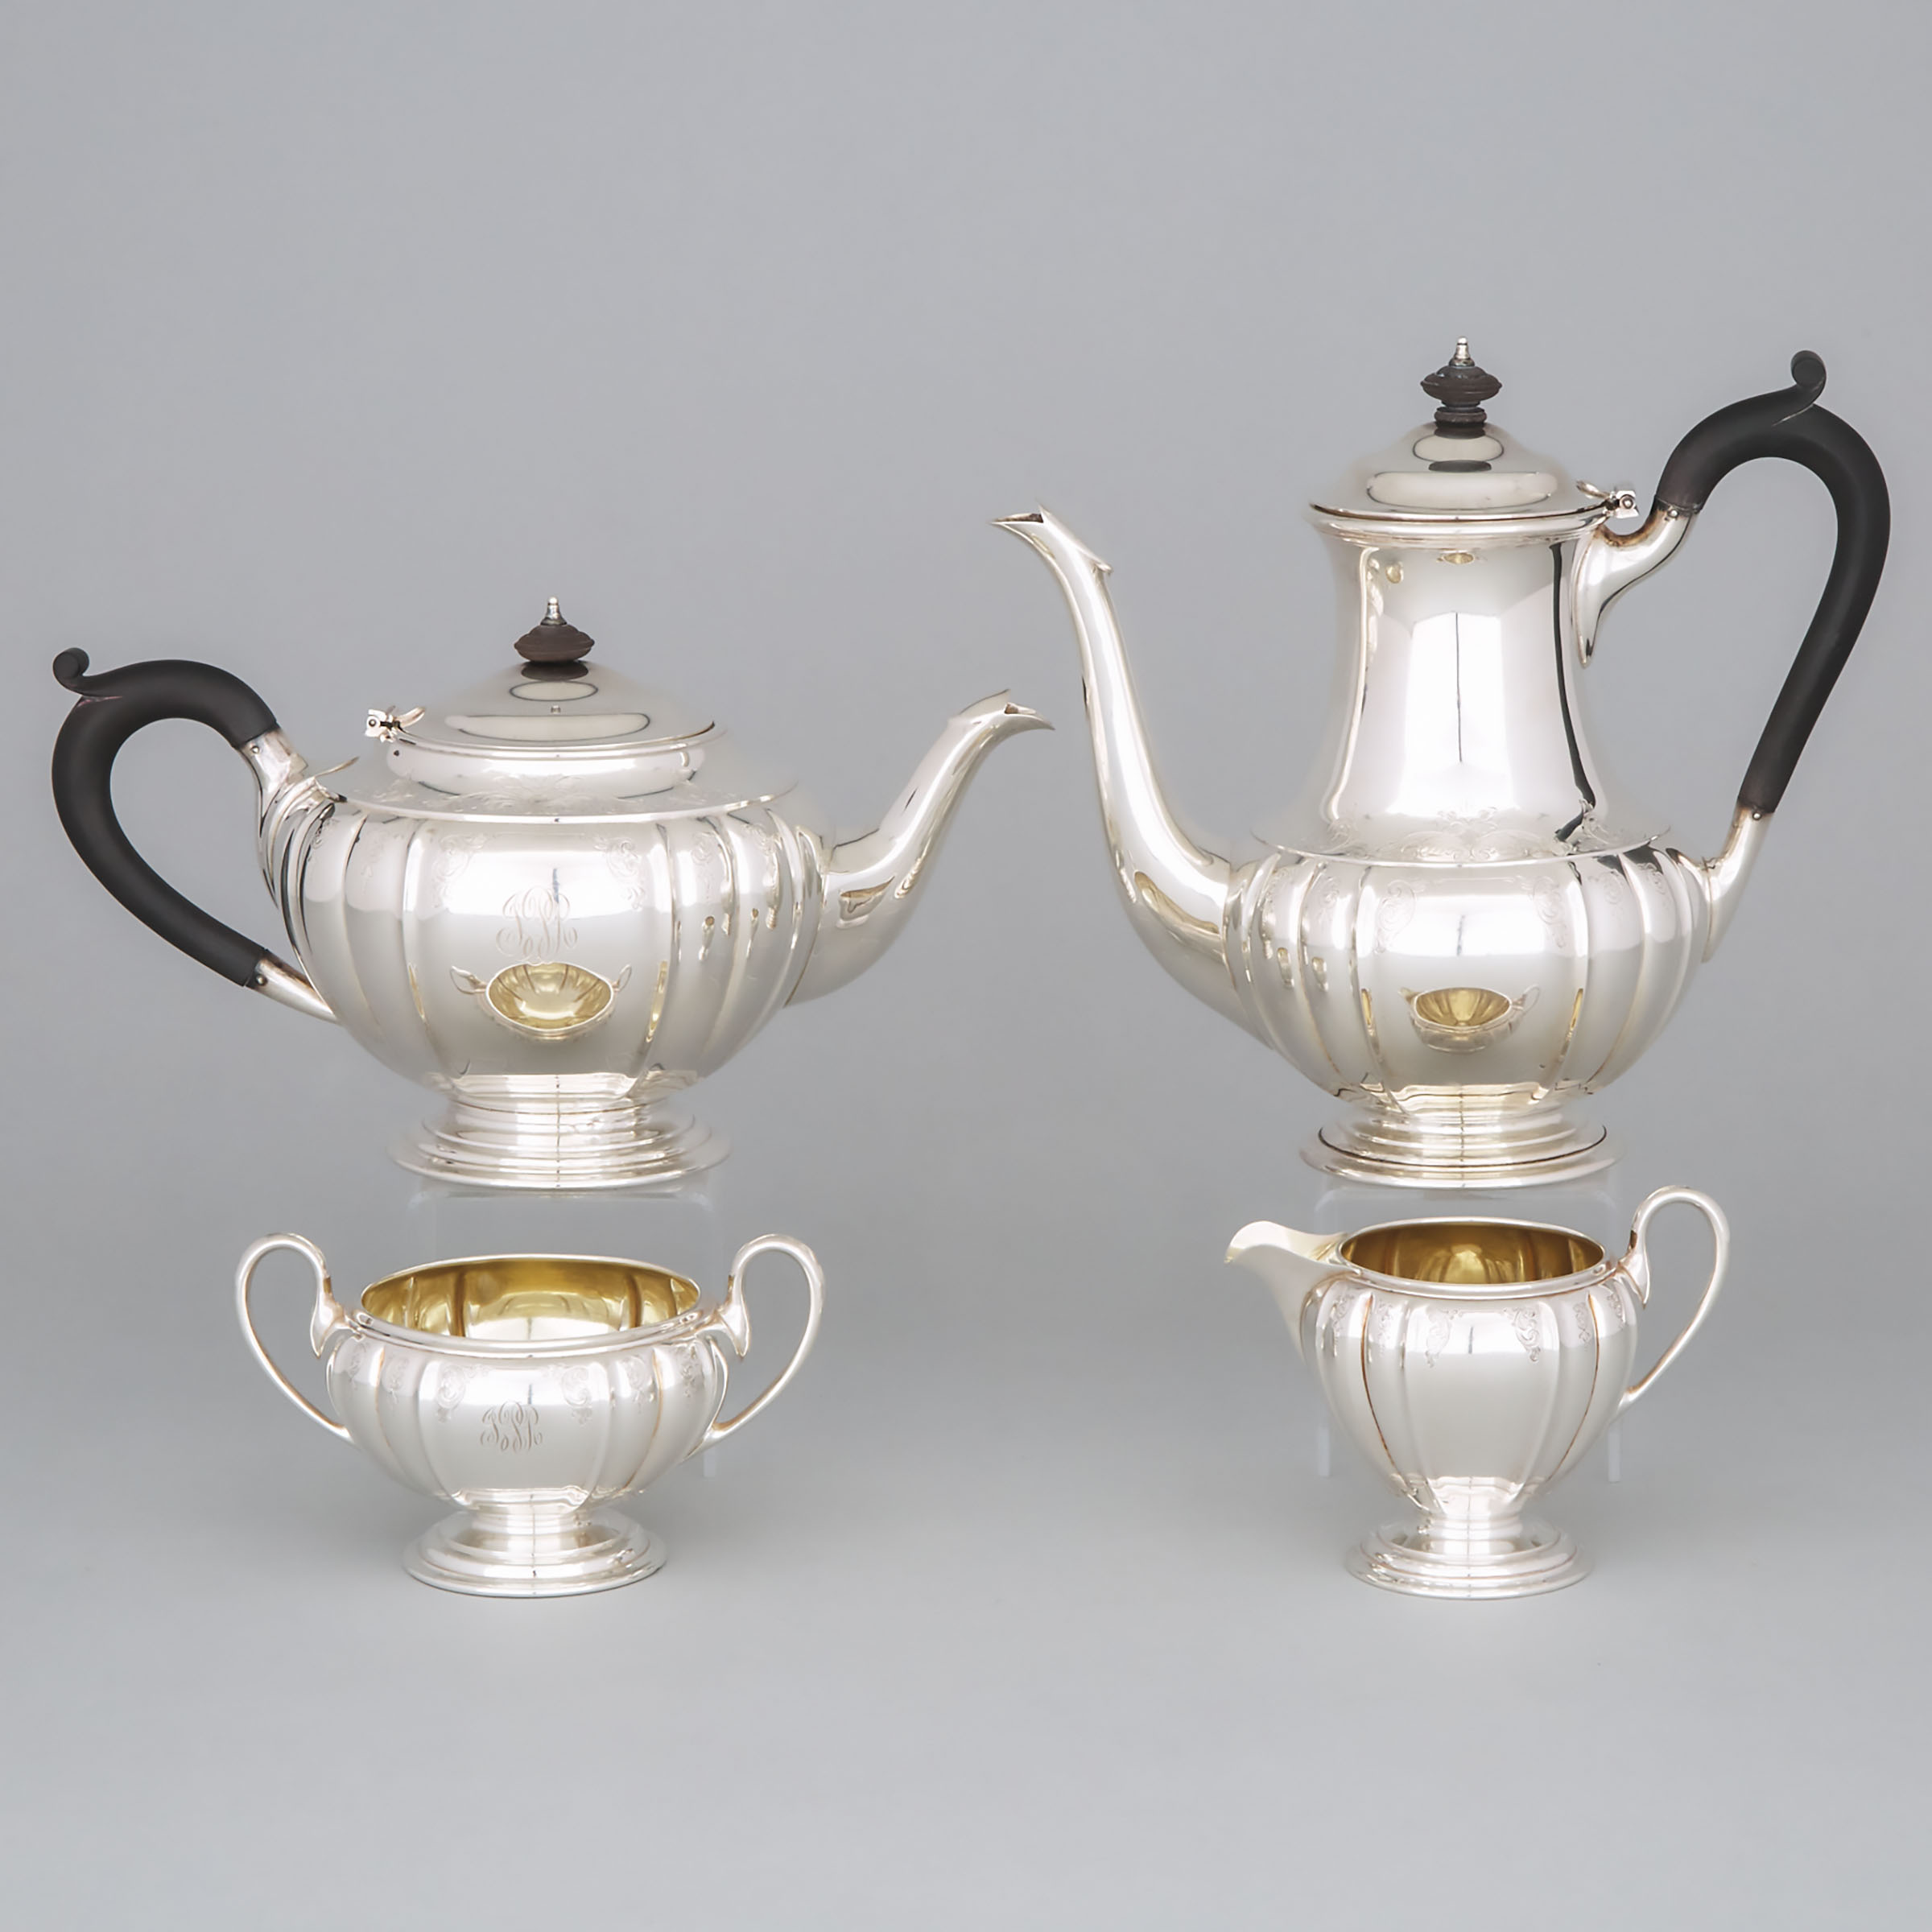 Canadian Silver Tea and Coffee Service, Henry Birks & Sons, Montreal, Que., 1936-38